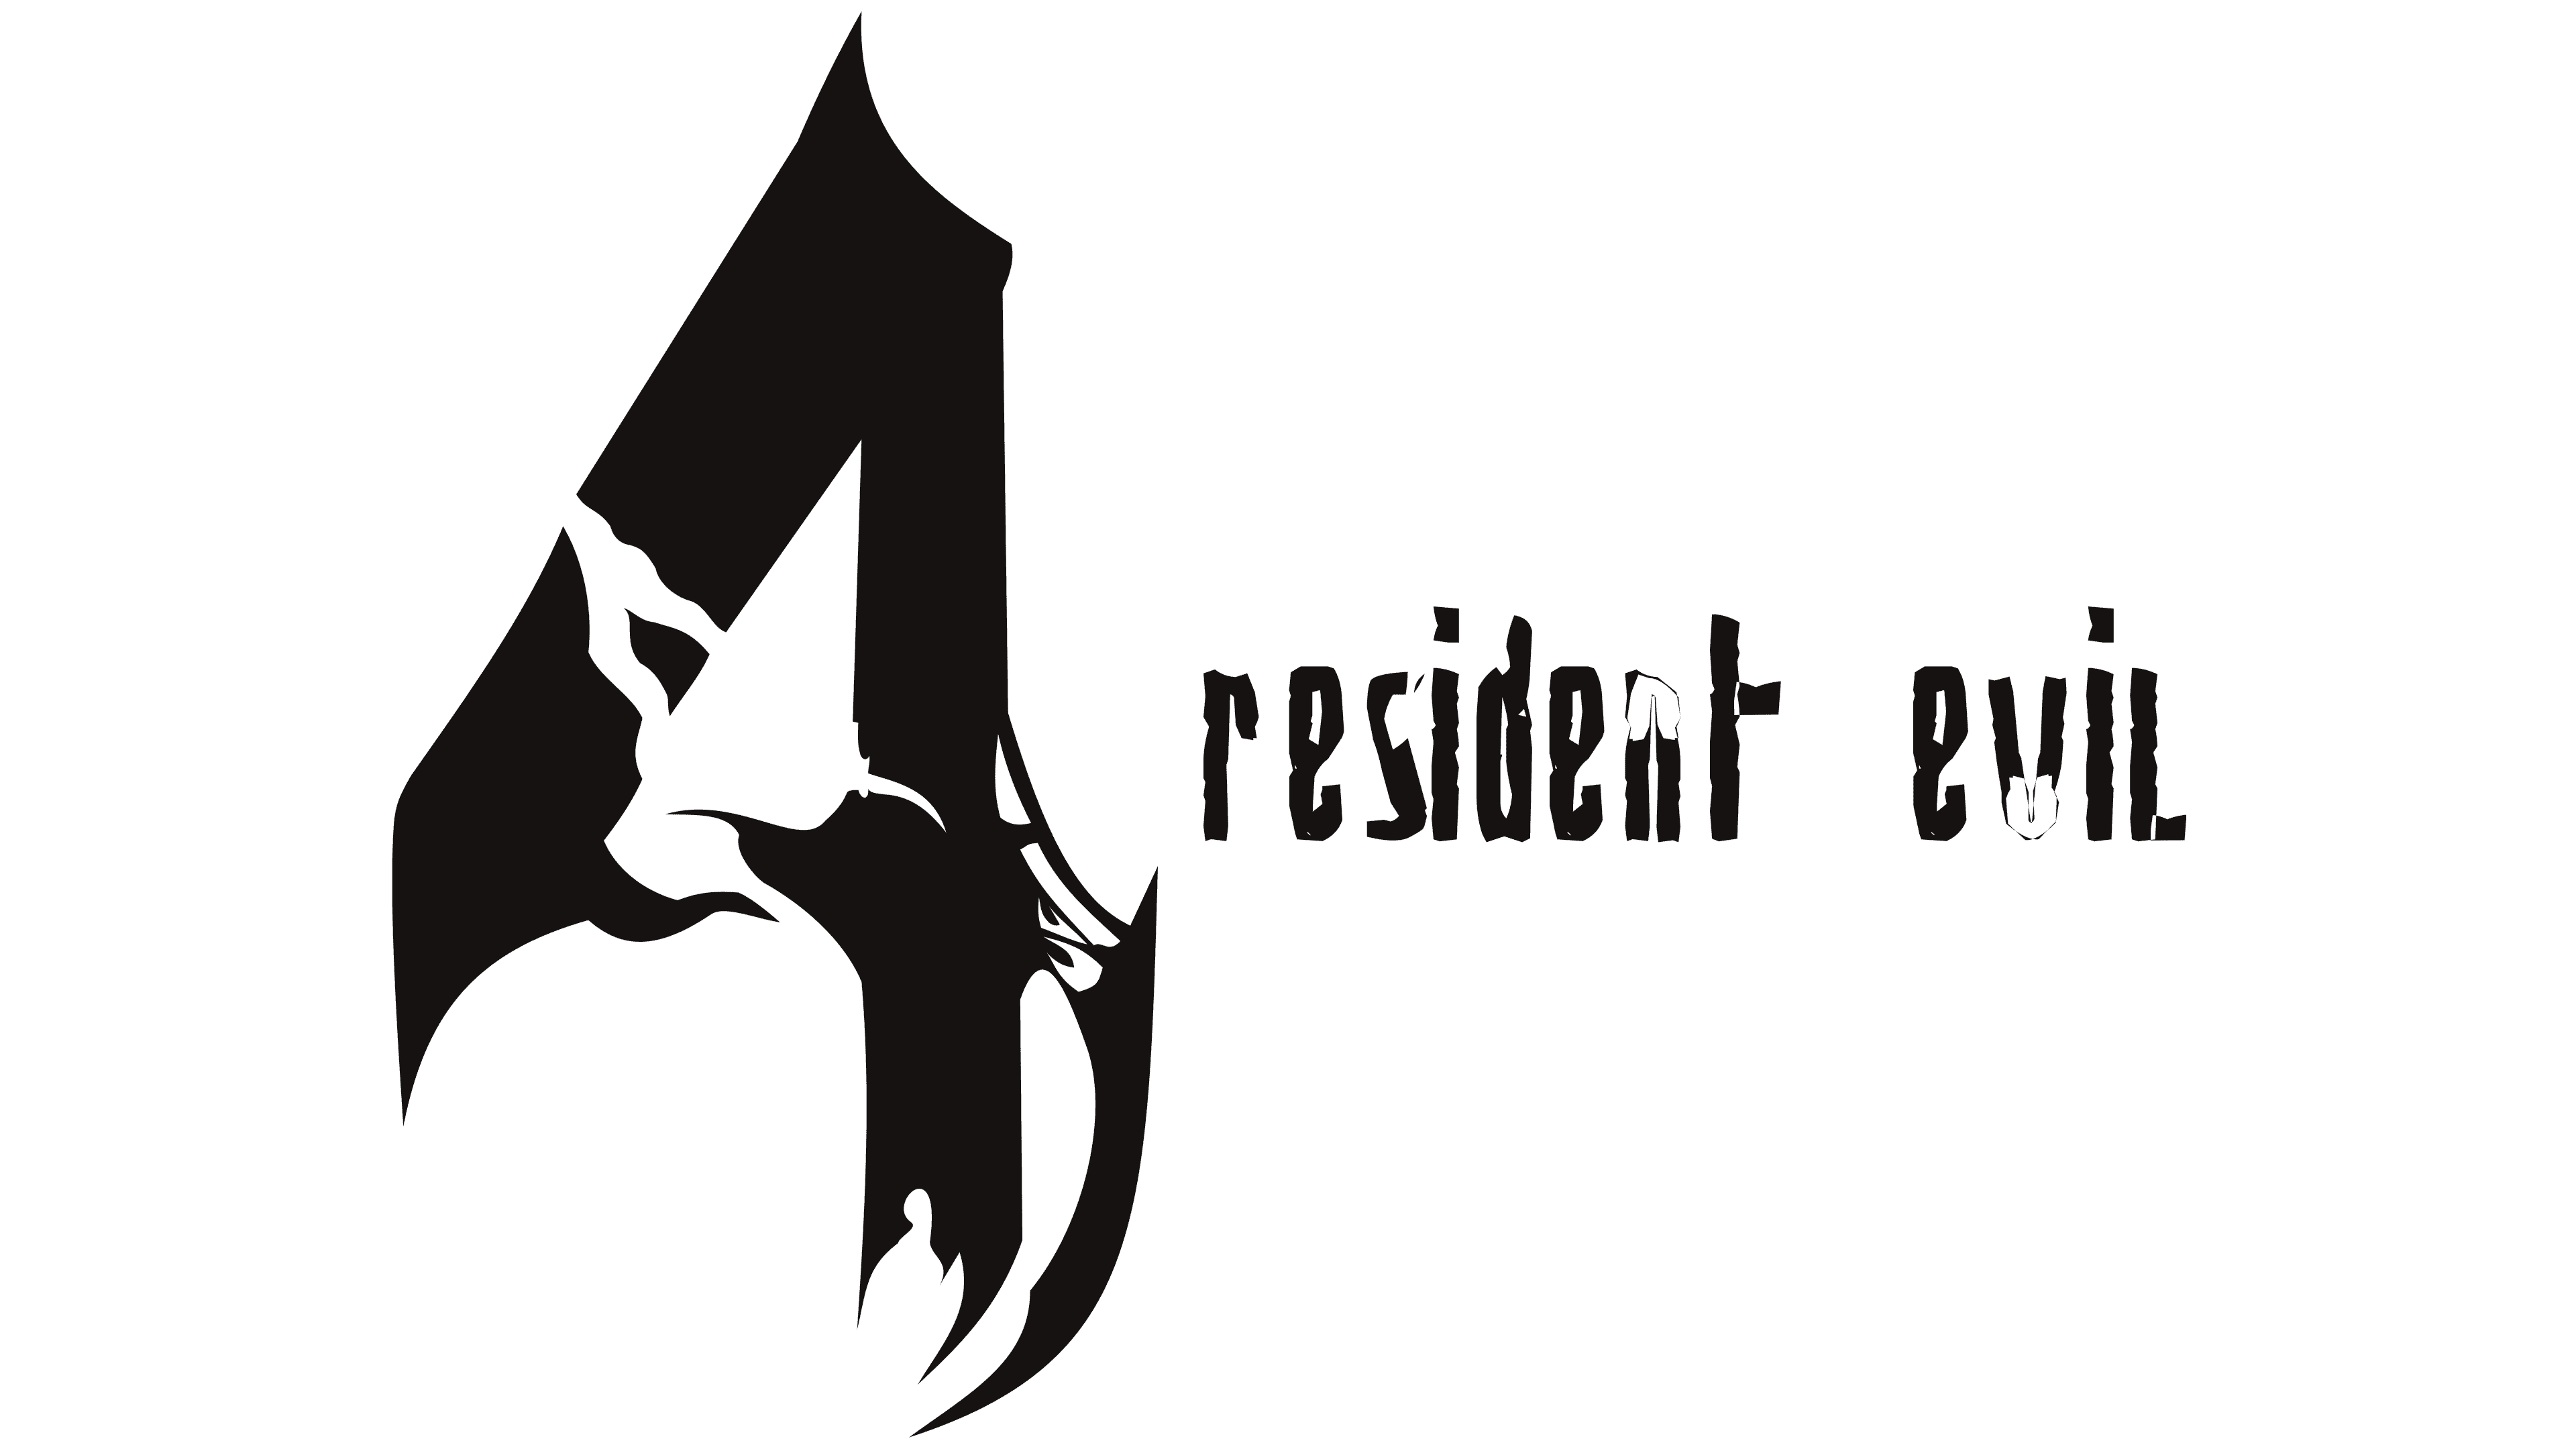 Resident Evil Logo, symbol, meaning, history, PNG, brand